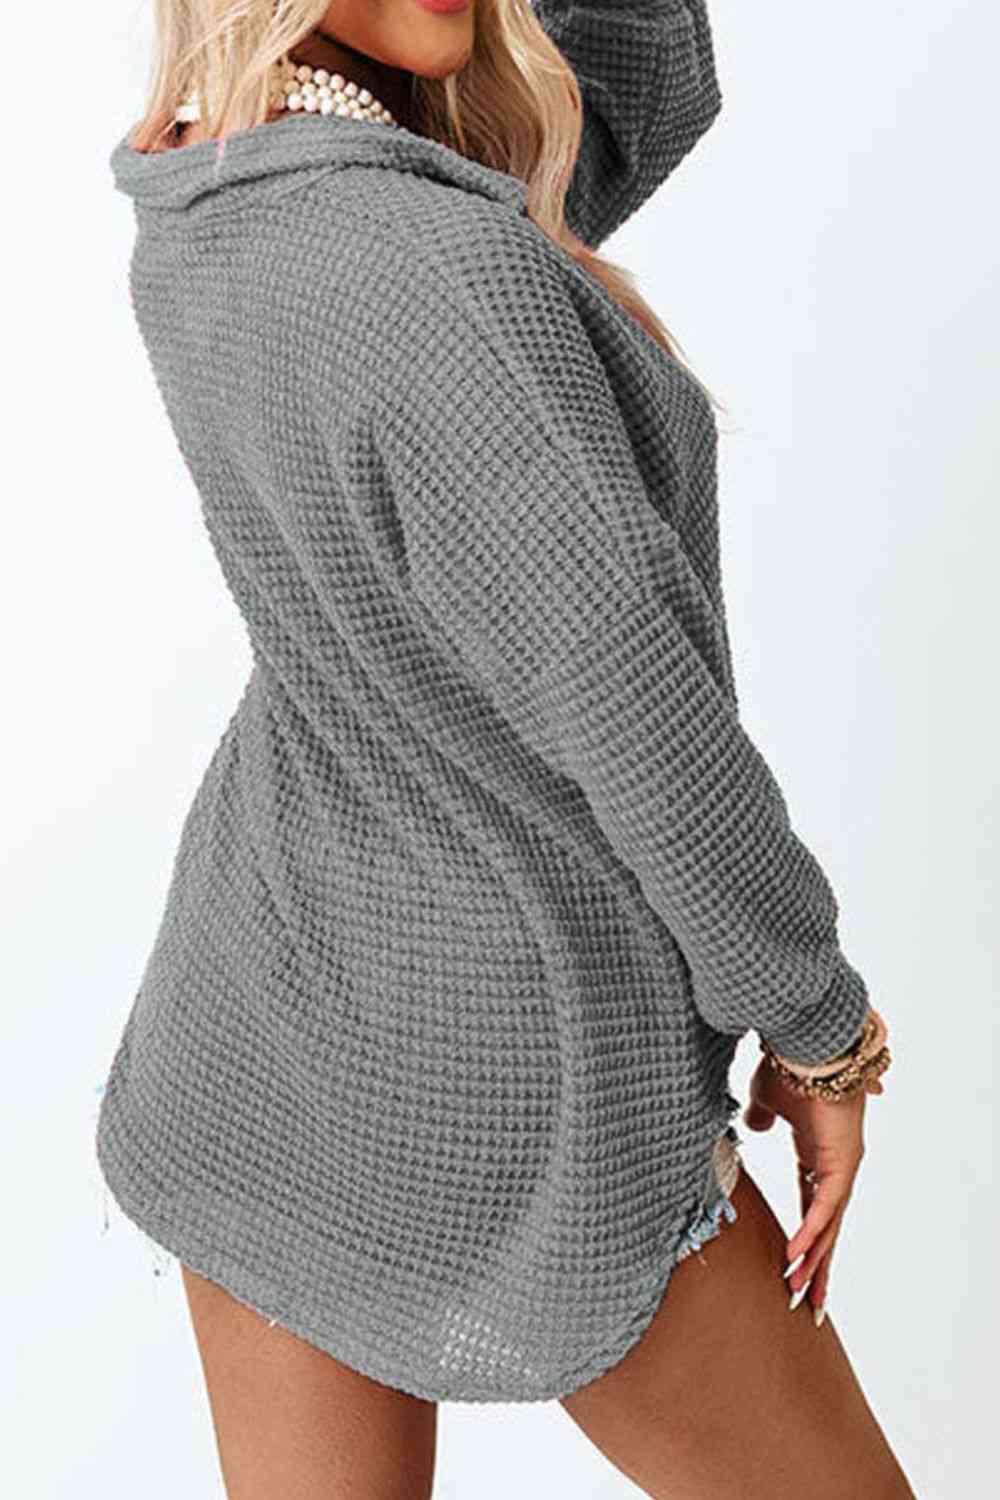 Waffle-Knit Button Up Long Sleeve Shirt with Pocket - Fashion Girl Online Store